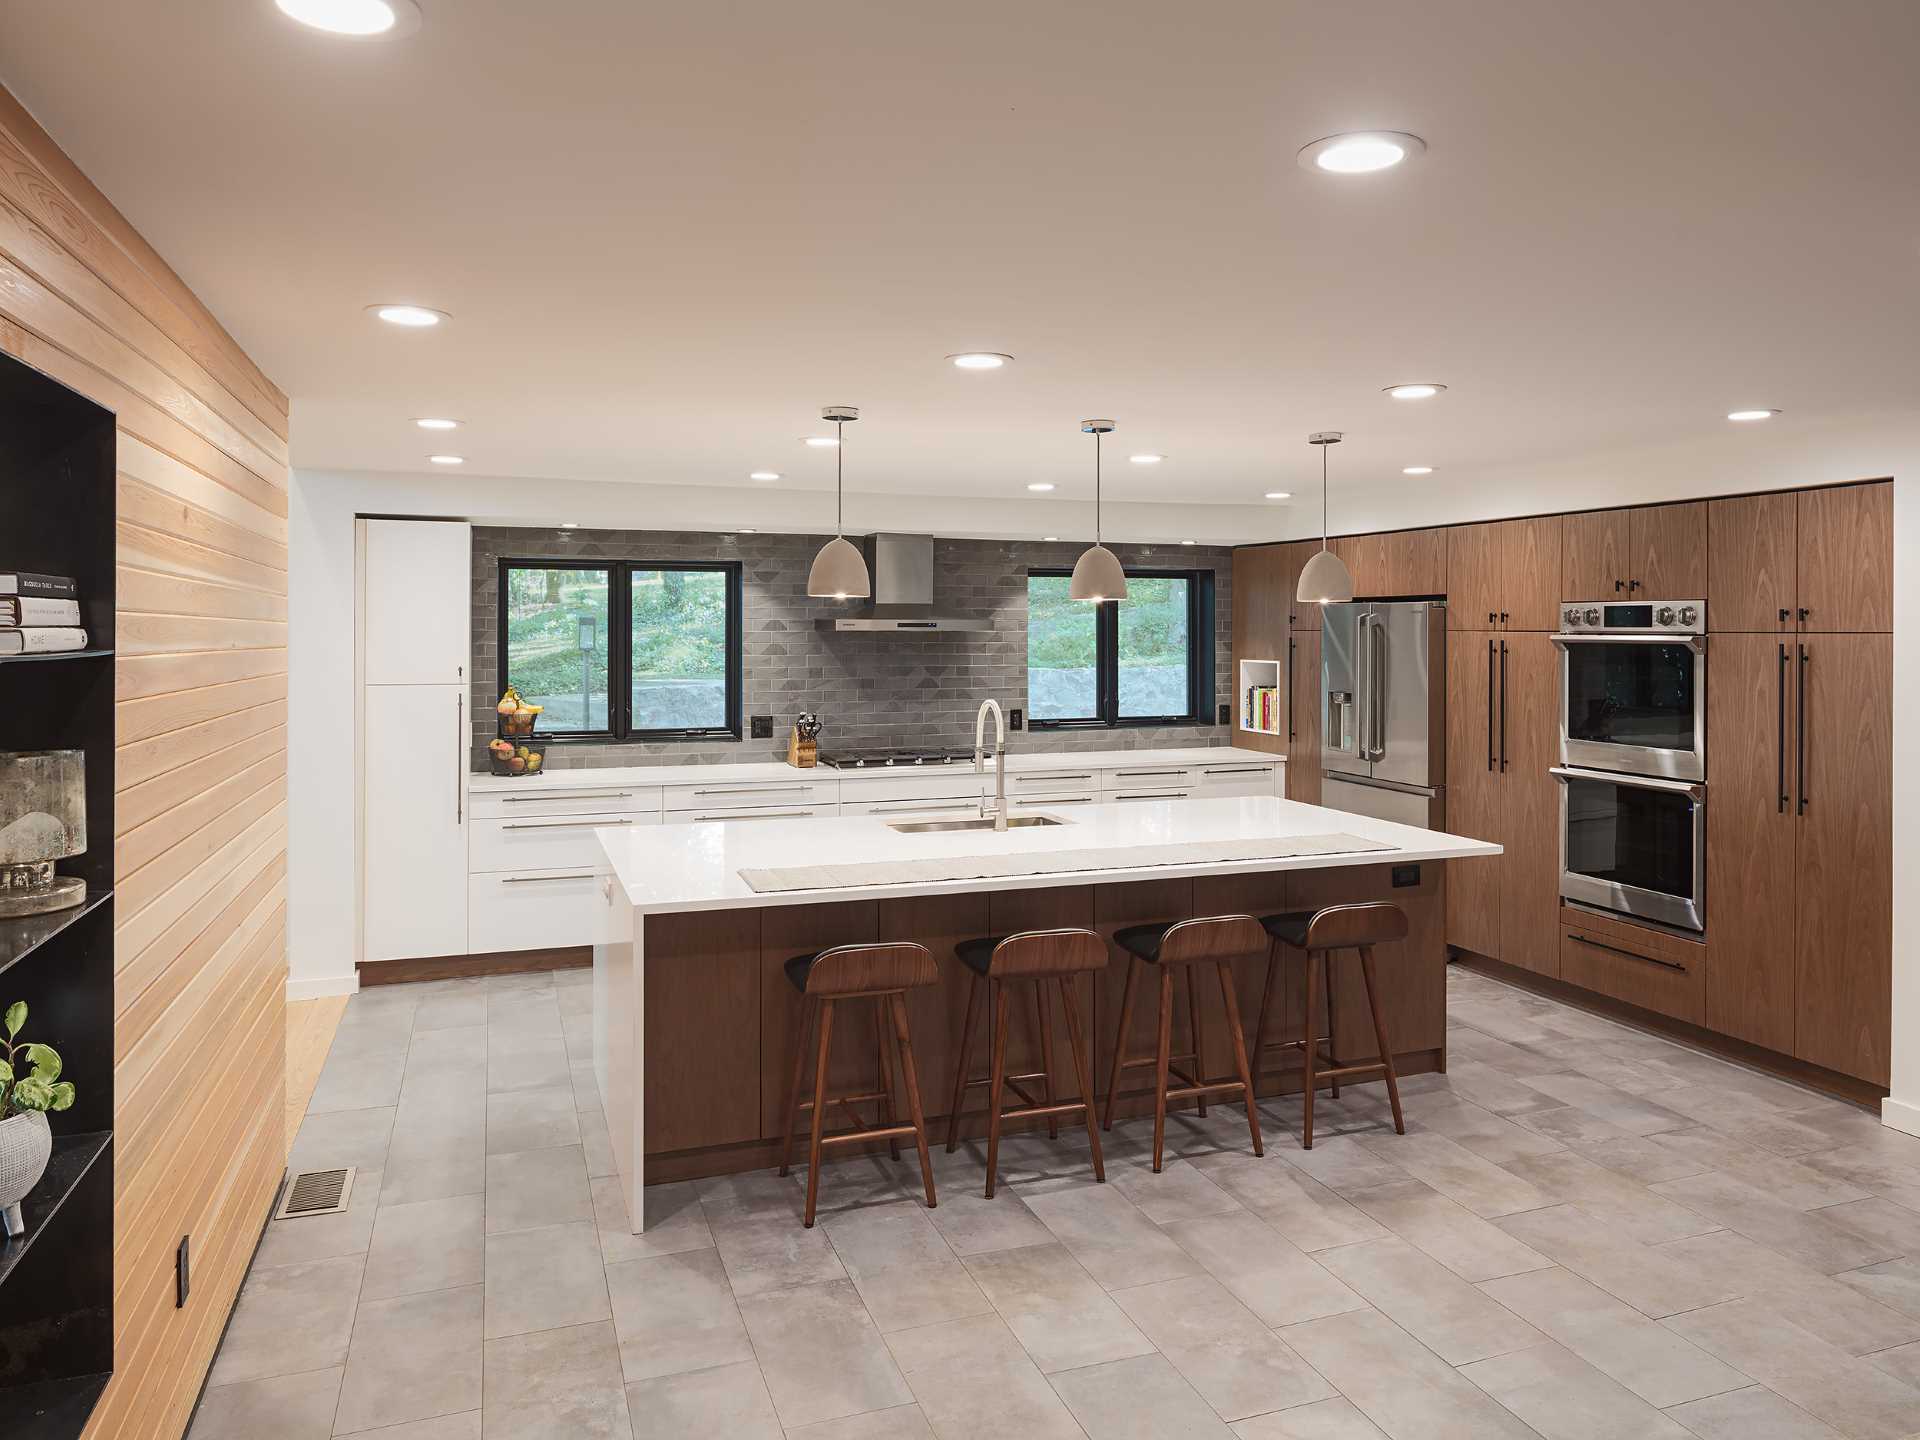 This modern kitchen includes a combination of walnut tall cabinets and matte white base cabinets that provide ample space for cooking and entertaining, with the large island separating the kitchen from the dining area.